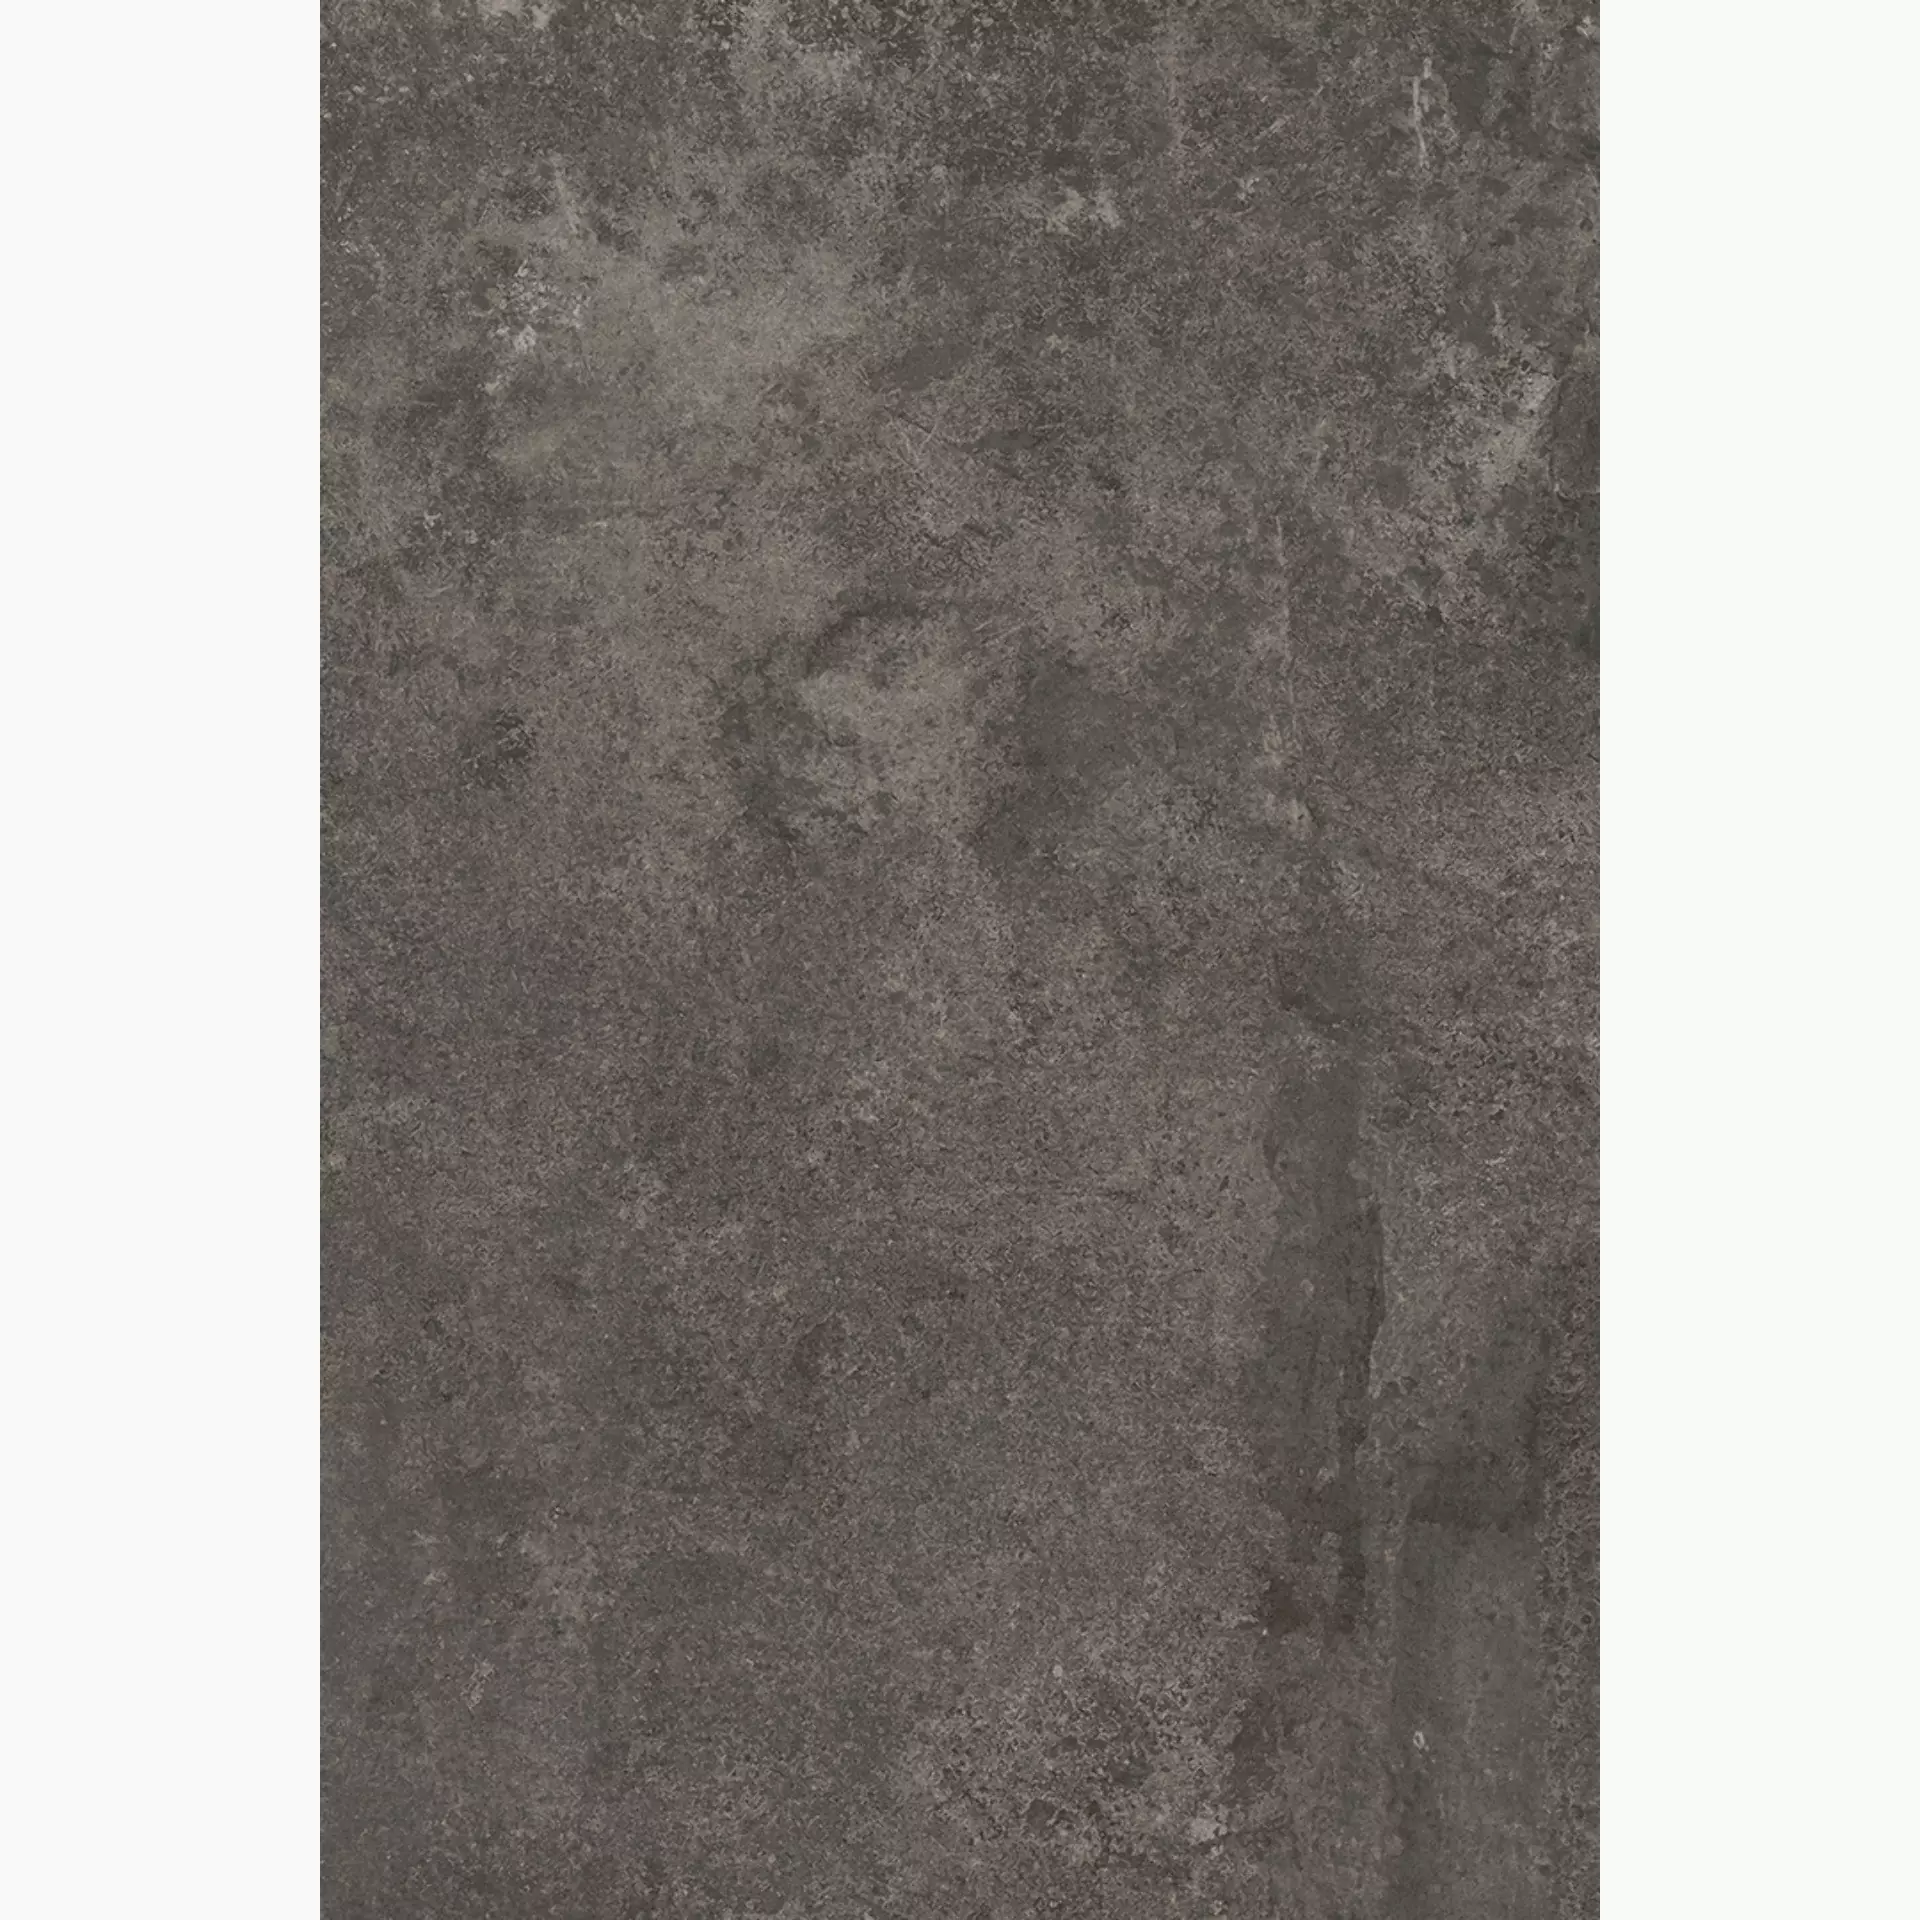 Fondovalle Reframe Graphite Natural REF097 40x80cm rectified 8,5mm